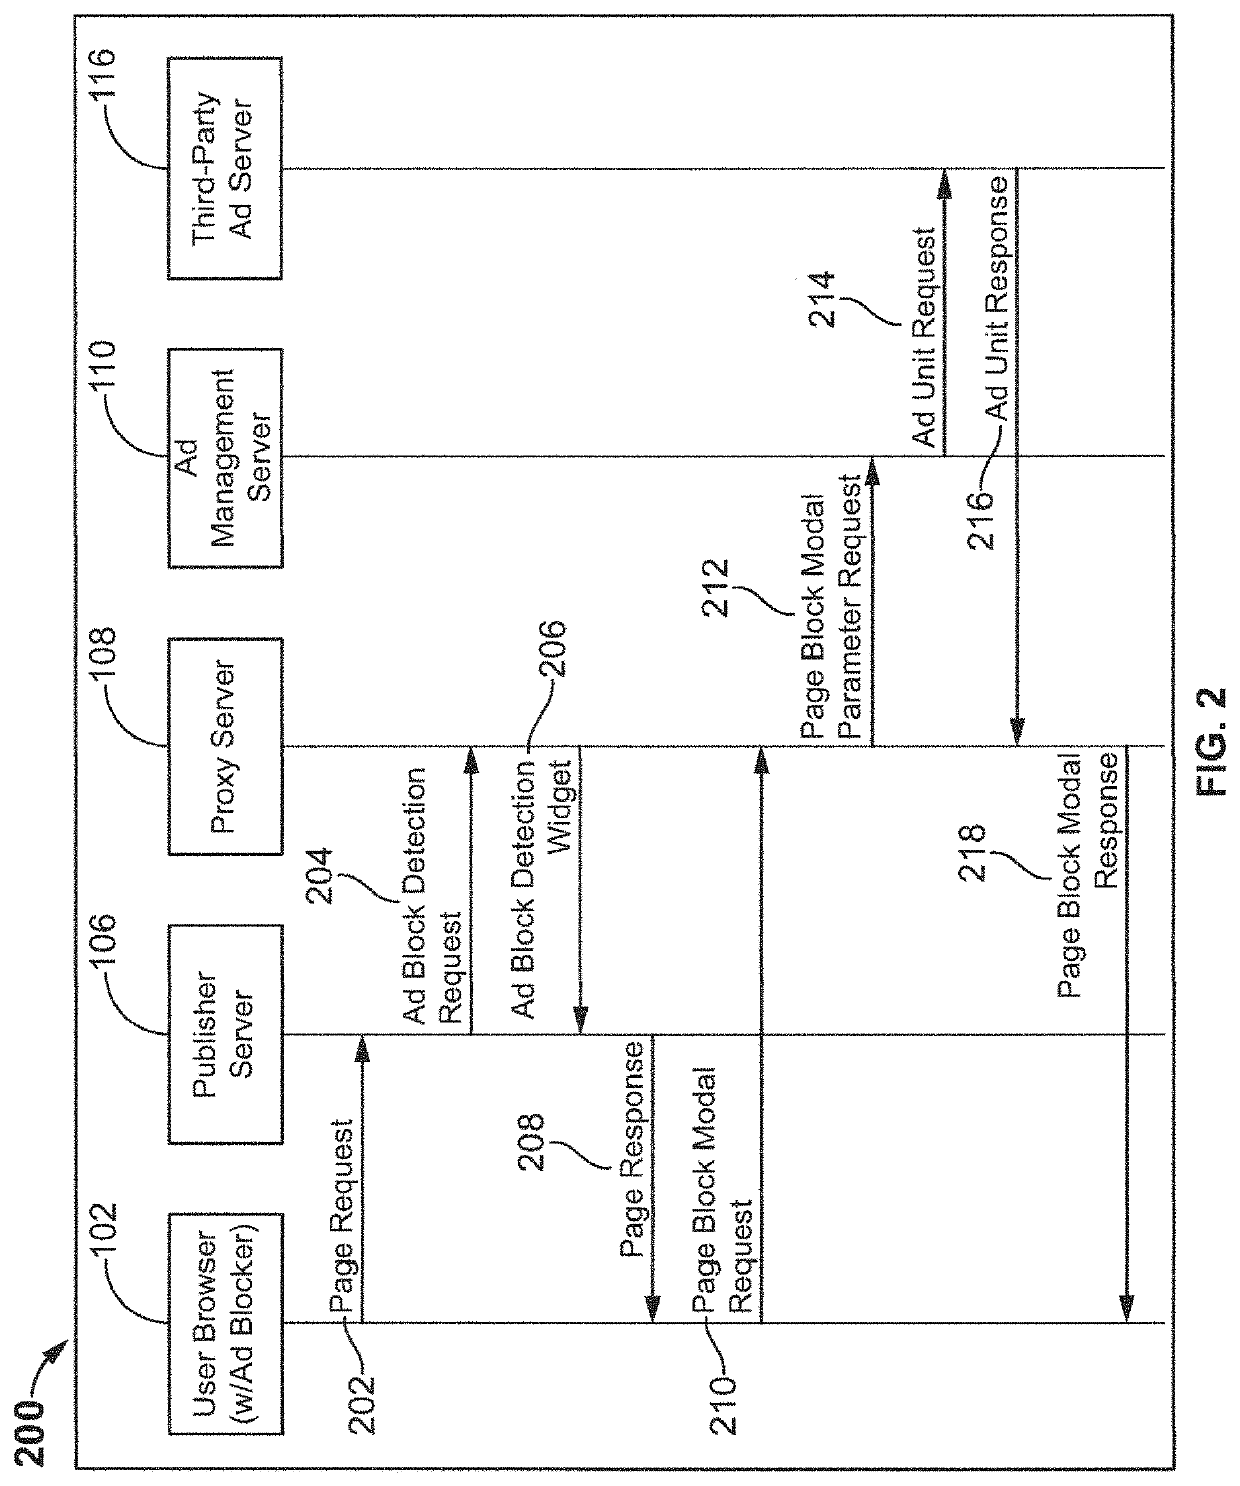 System and method for circumventing advertisement blockers